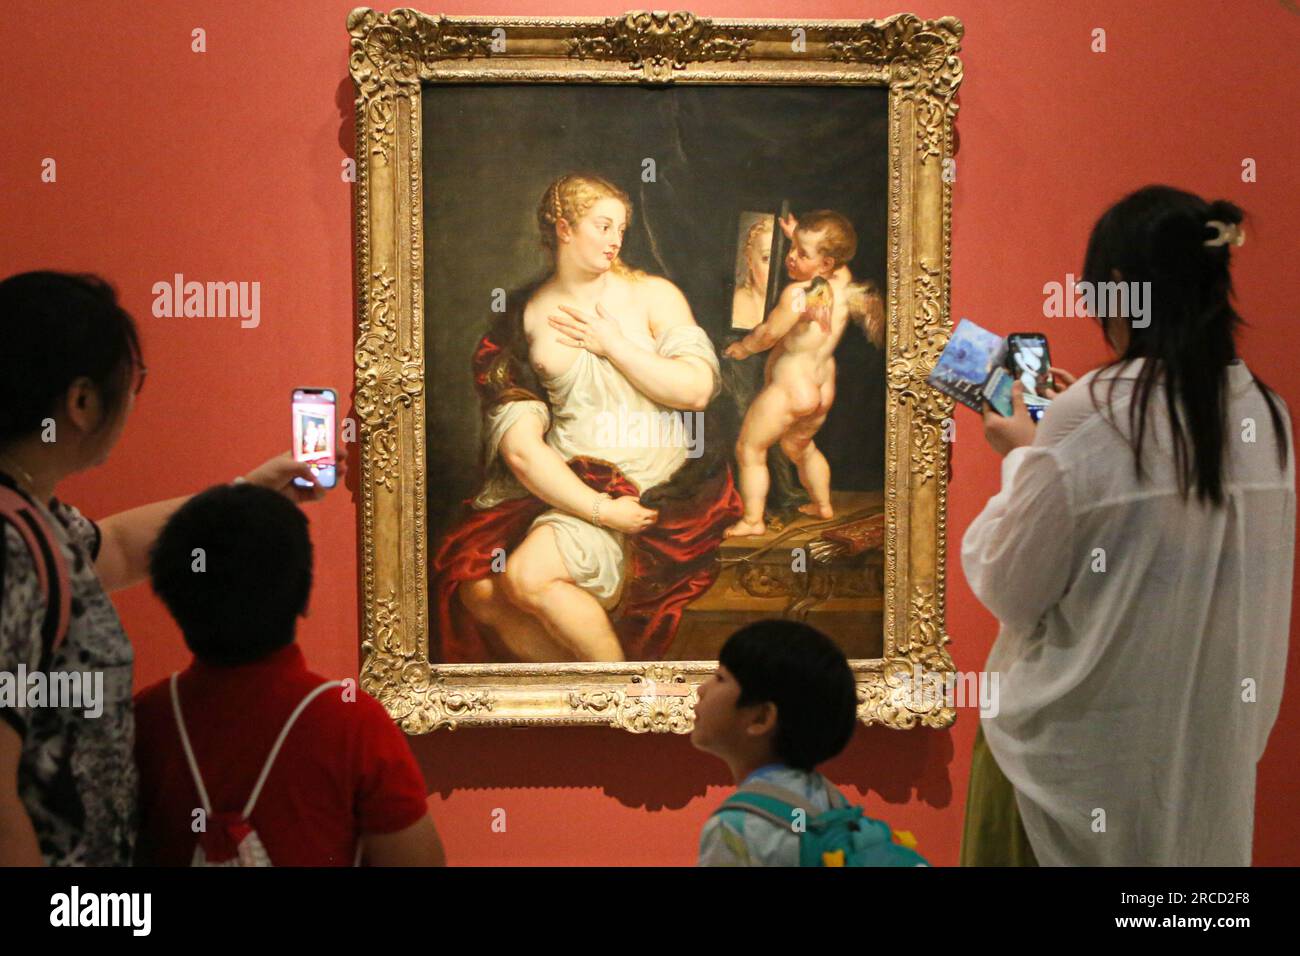 Shanghai. 22nd June, 2023. Visitors take photos of the painting 'Venus and Cupid' by Peter Paul Rubens during the exhibition 'The Greats of Six Centuries: Masterpieces from the Museo Nacional Thyssen-Bornemisza' at the Museum of Art Pudong (MAP) in east China's Shanghai July 13, 2023. The exhibition, featuring a selection of 70 paintings spanning six centuries, opened to the public at MAP on June 22, 2023 and will last till Nov. 12 this year. Credit: Xin Mengchen/Xinhua/Alamy Live News Stock Photo